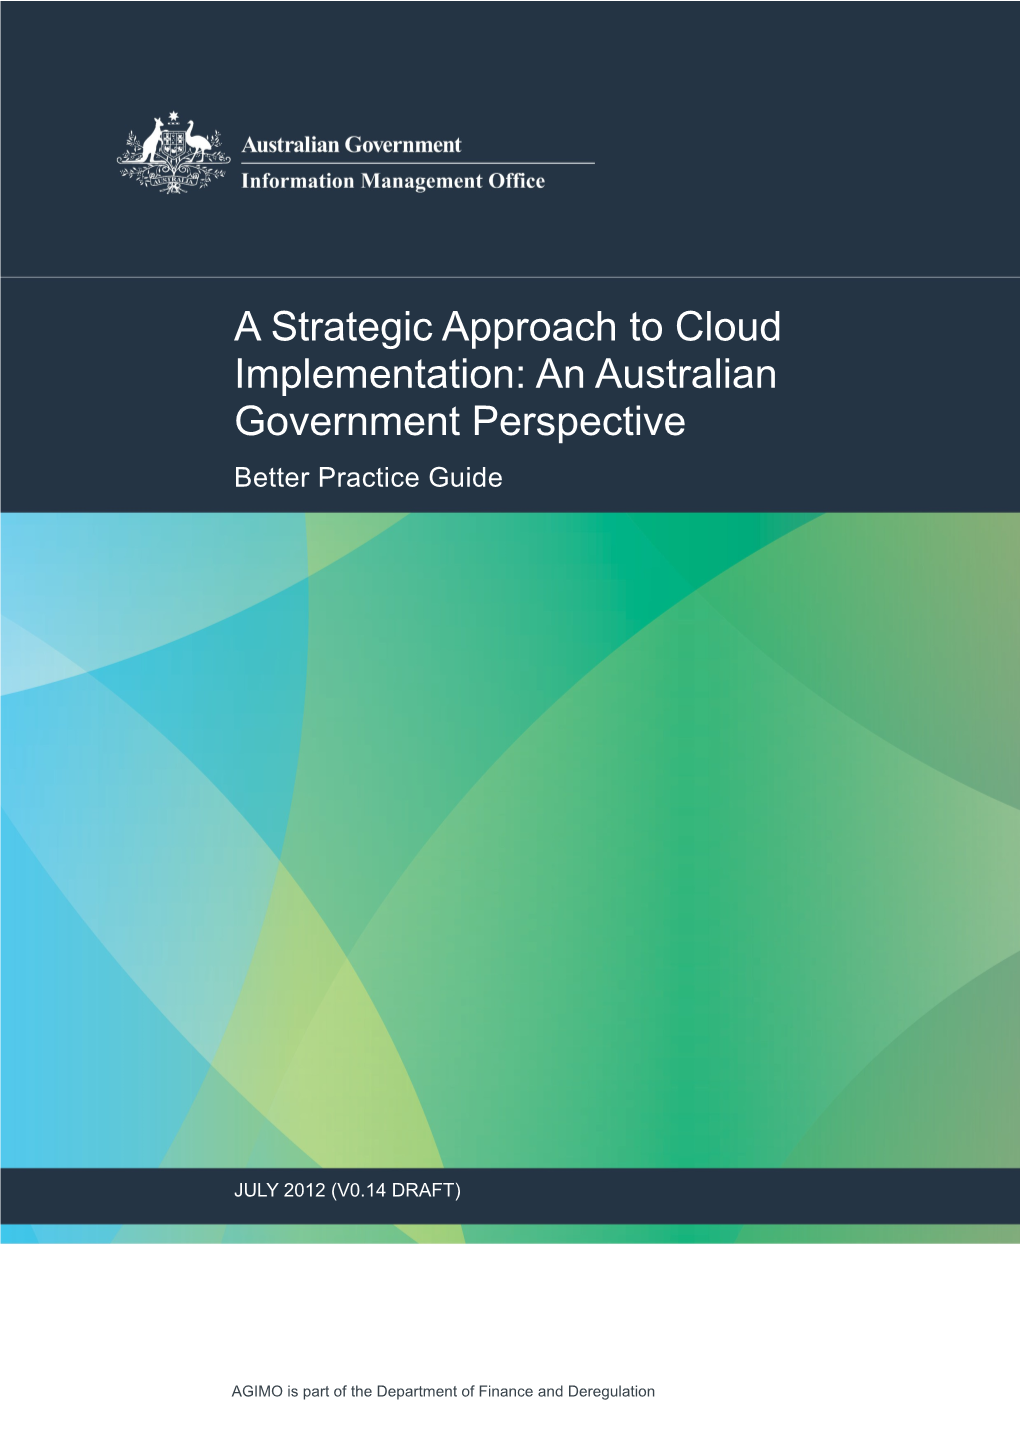 A Strategic Approach to Cloud Implementation: an Australian Government Perspective